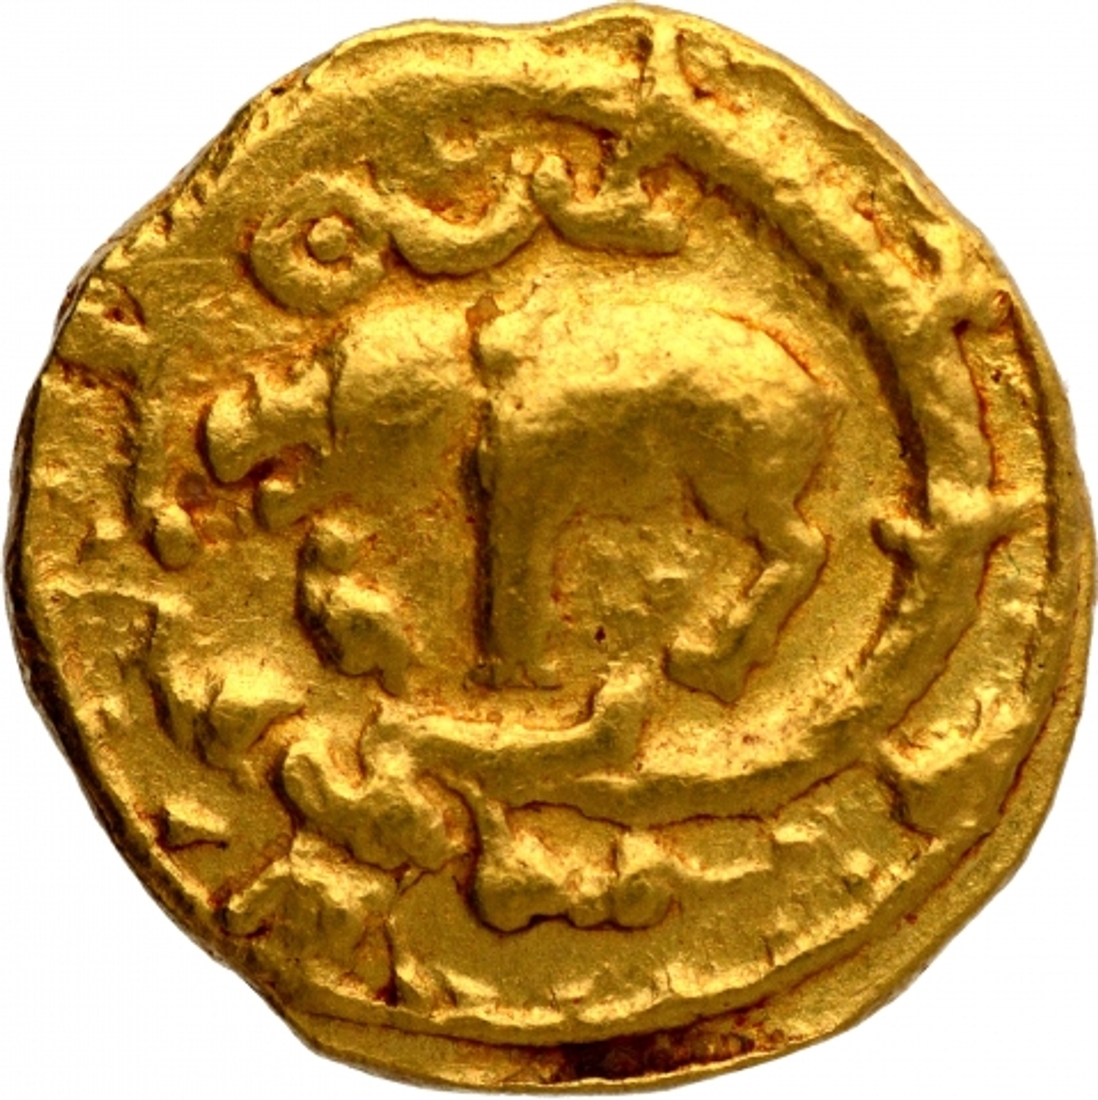 Exceptionally Rare Gold Gadyana Coin of Chalukyas of Badami.